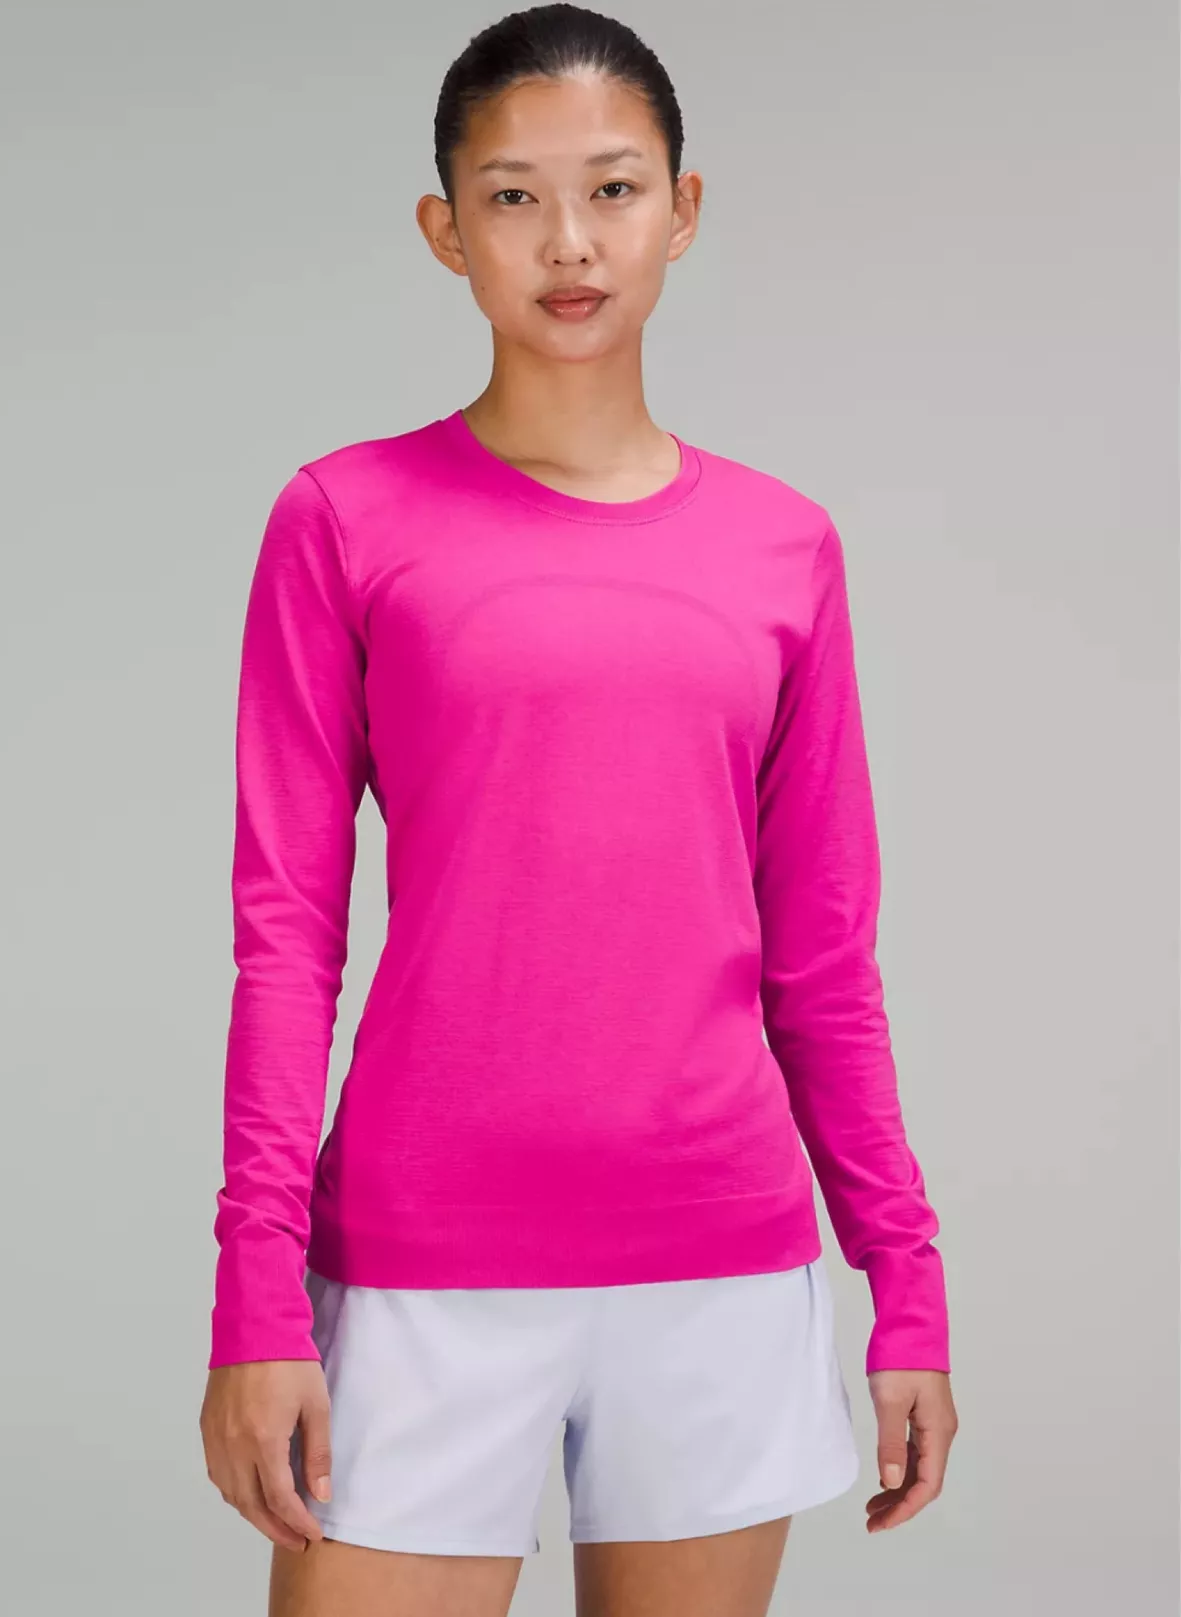  Preppy Clothes Long Sleeve Shirts For Women Basic